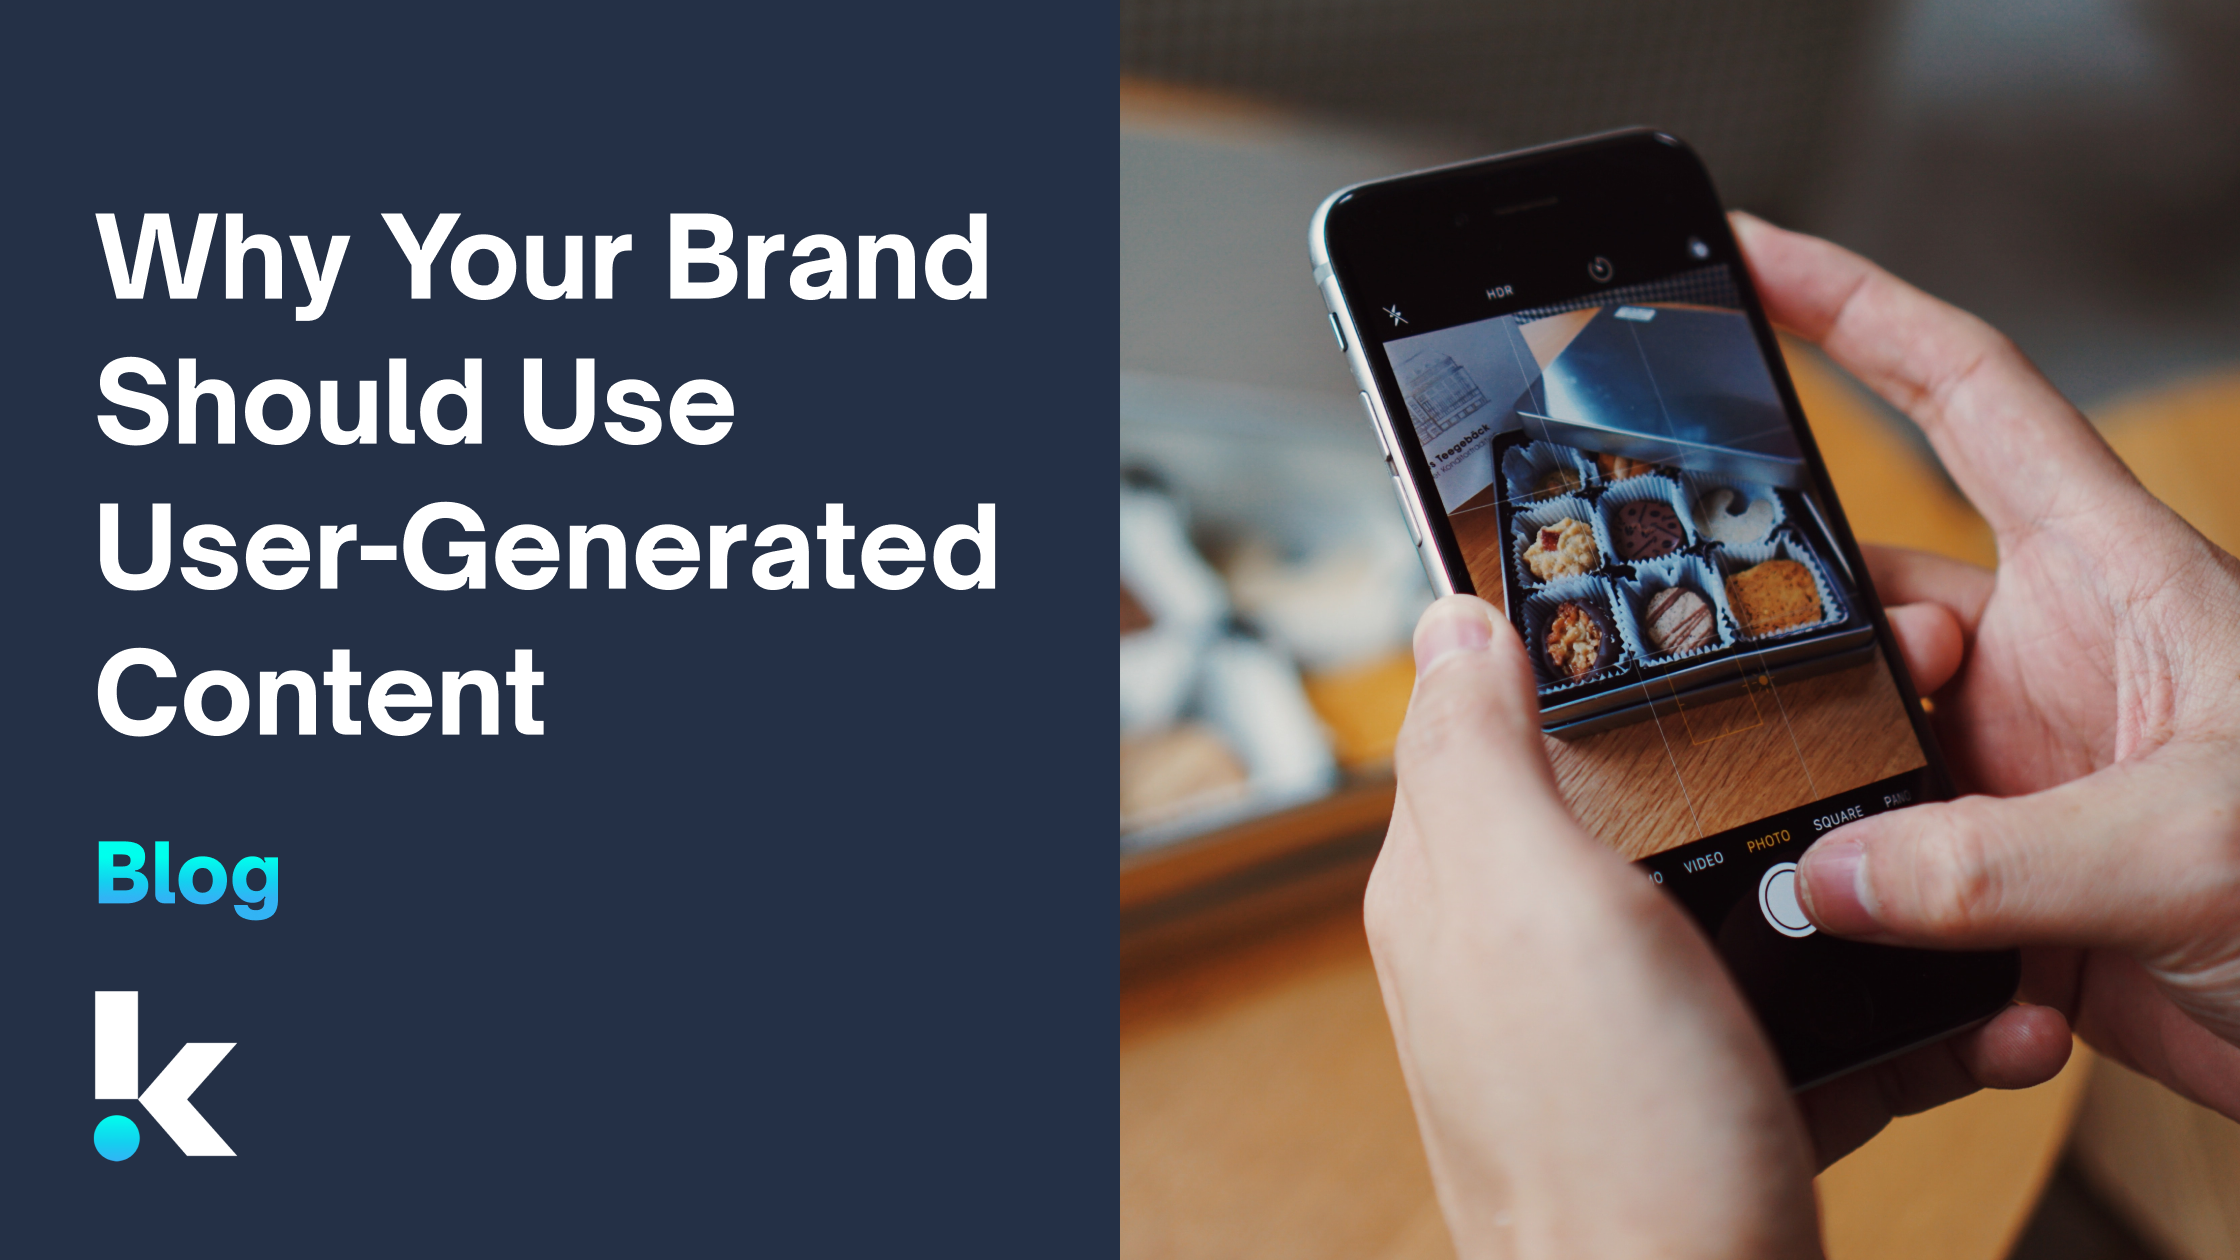 In this blog, we detail how user-generated content allows brands to increase social media reach and innovatively engage customers.